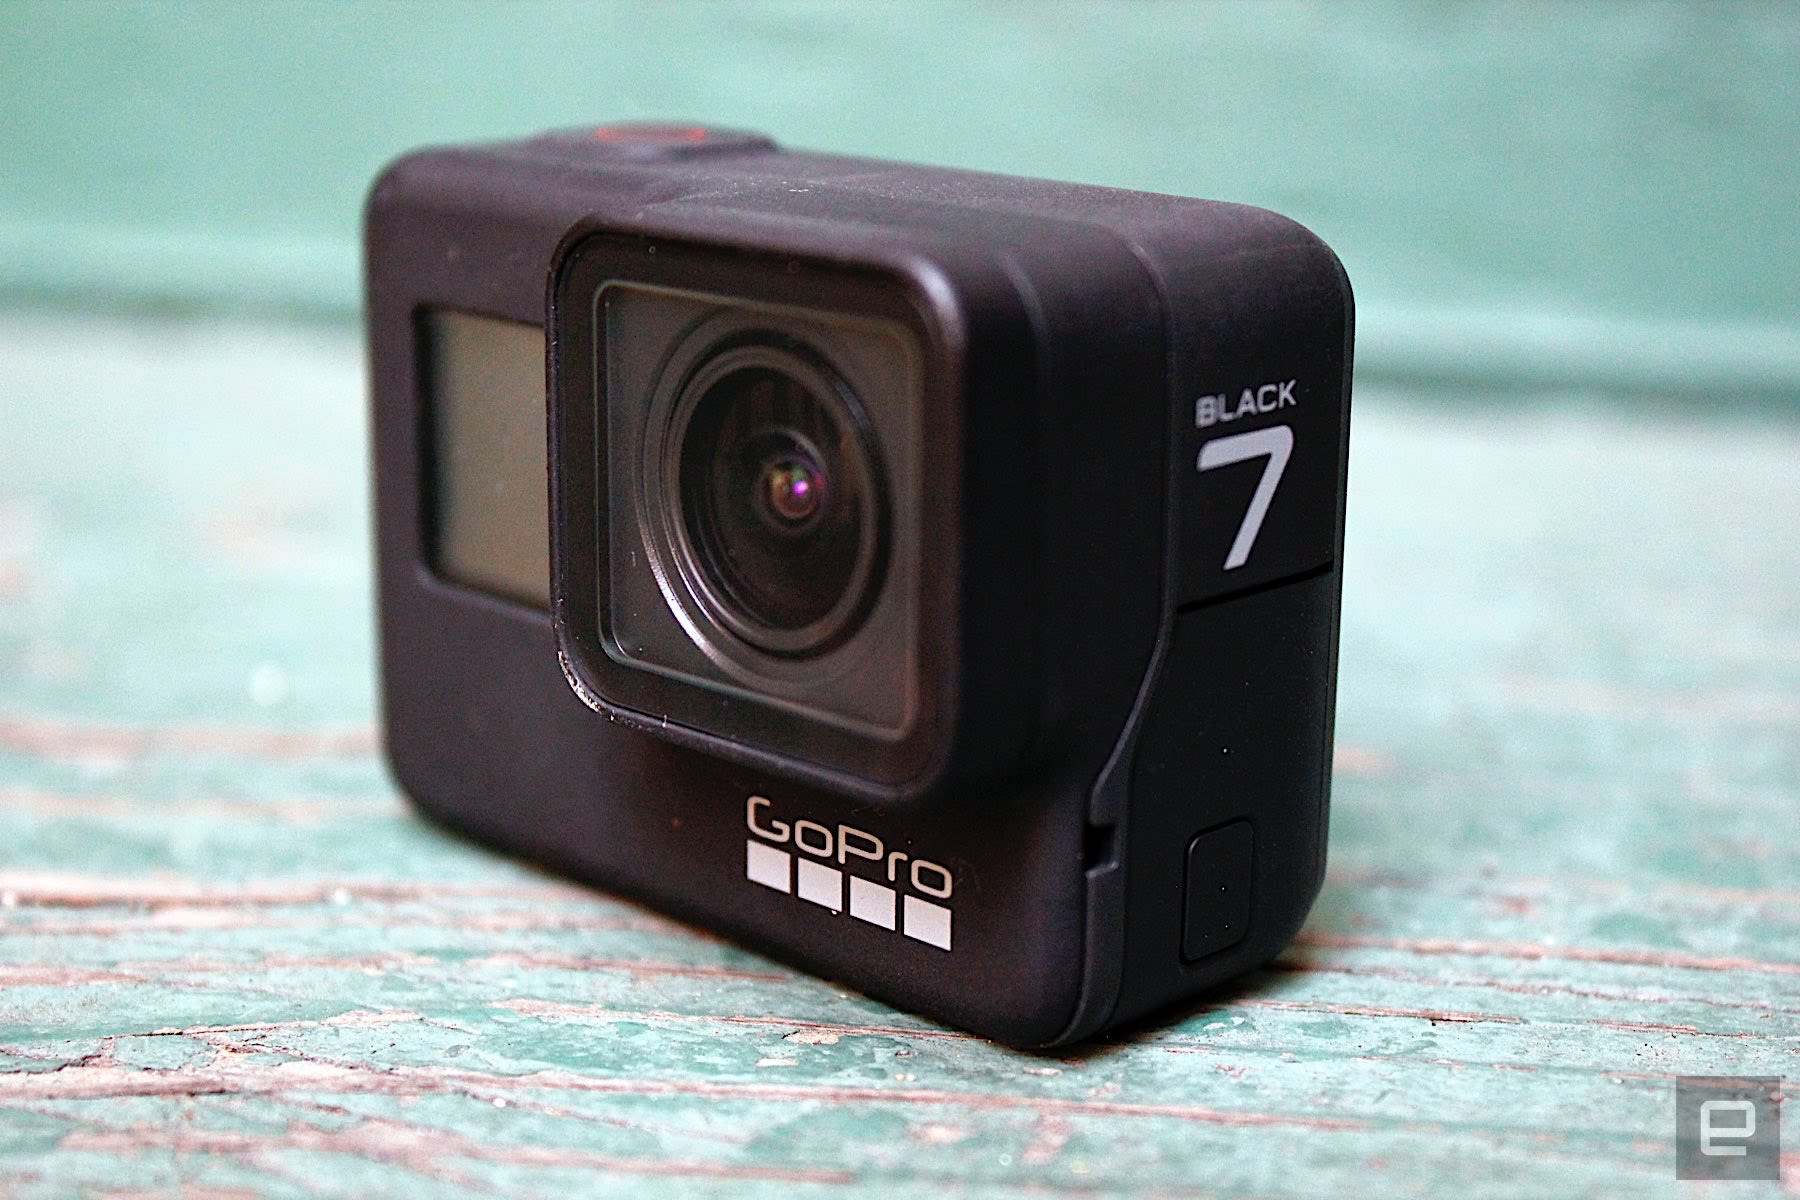 GoPro Hero 7 Black review: An action camera for the social age